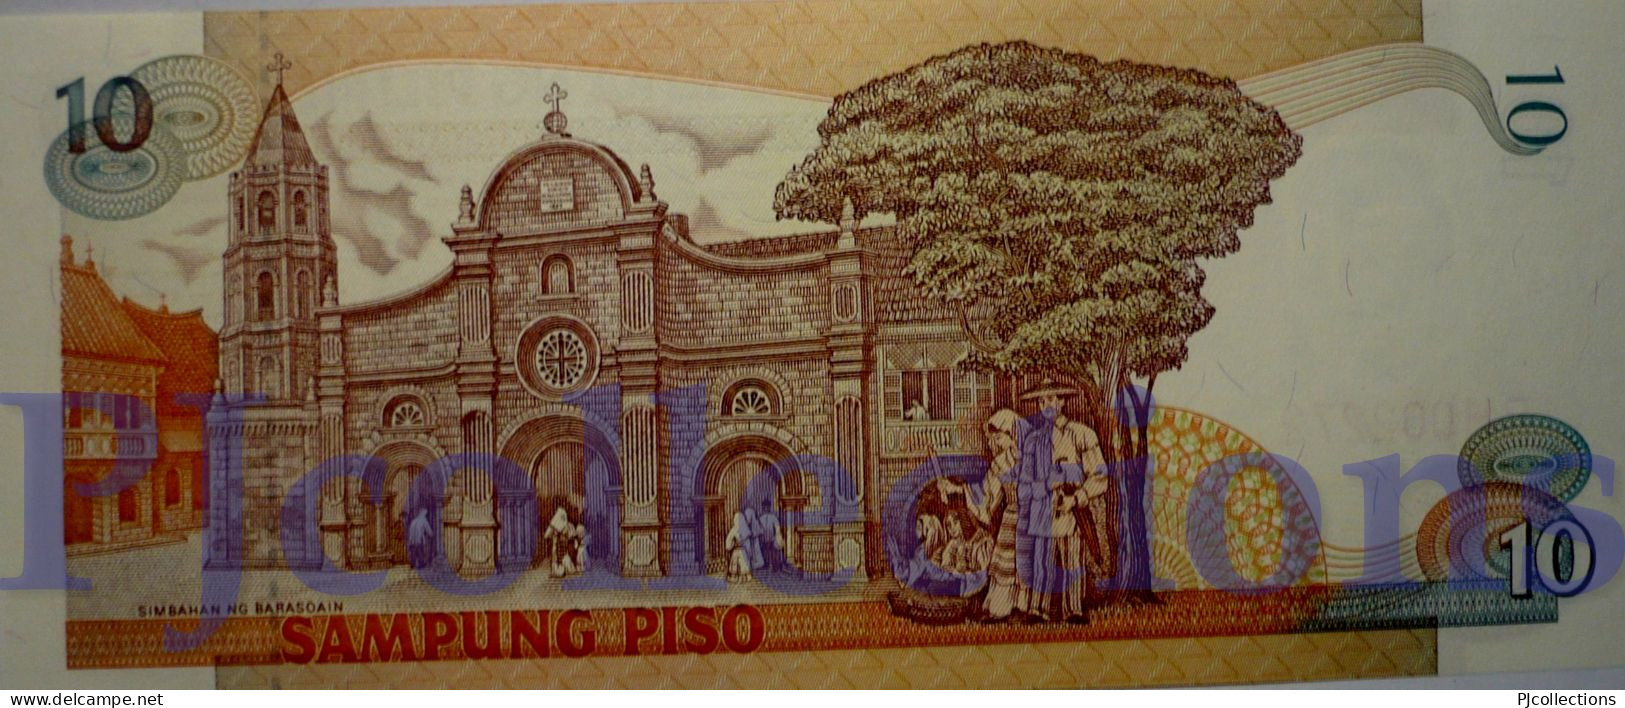 PHILIPPINES 10 PISO 1995/97 PICK 181a UNC LOW SERIAL NUMBER "RH002272 - Filippine